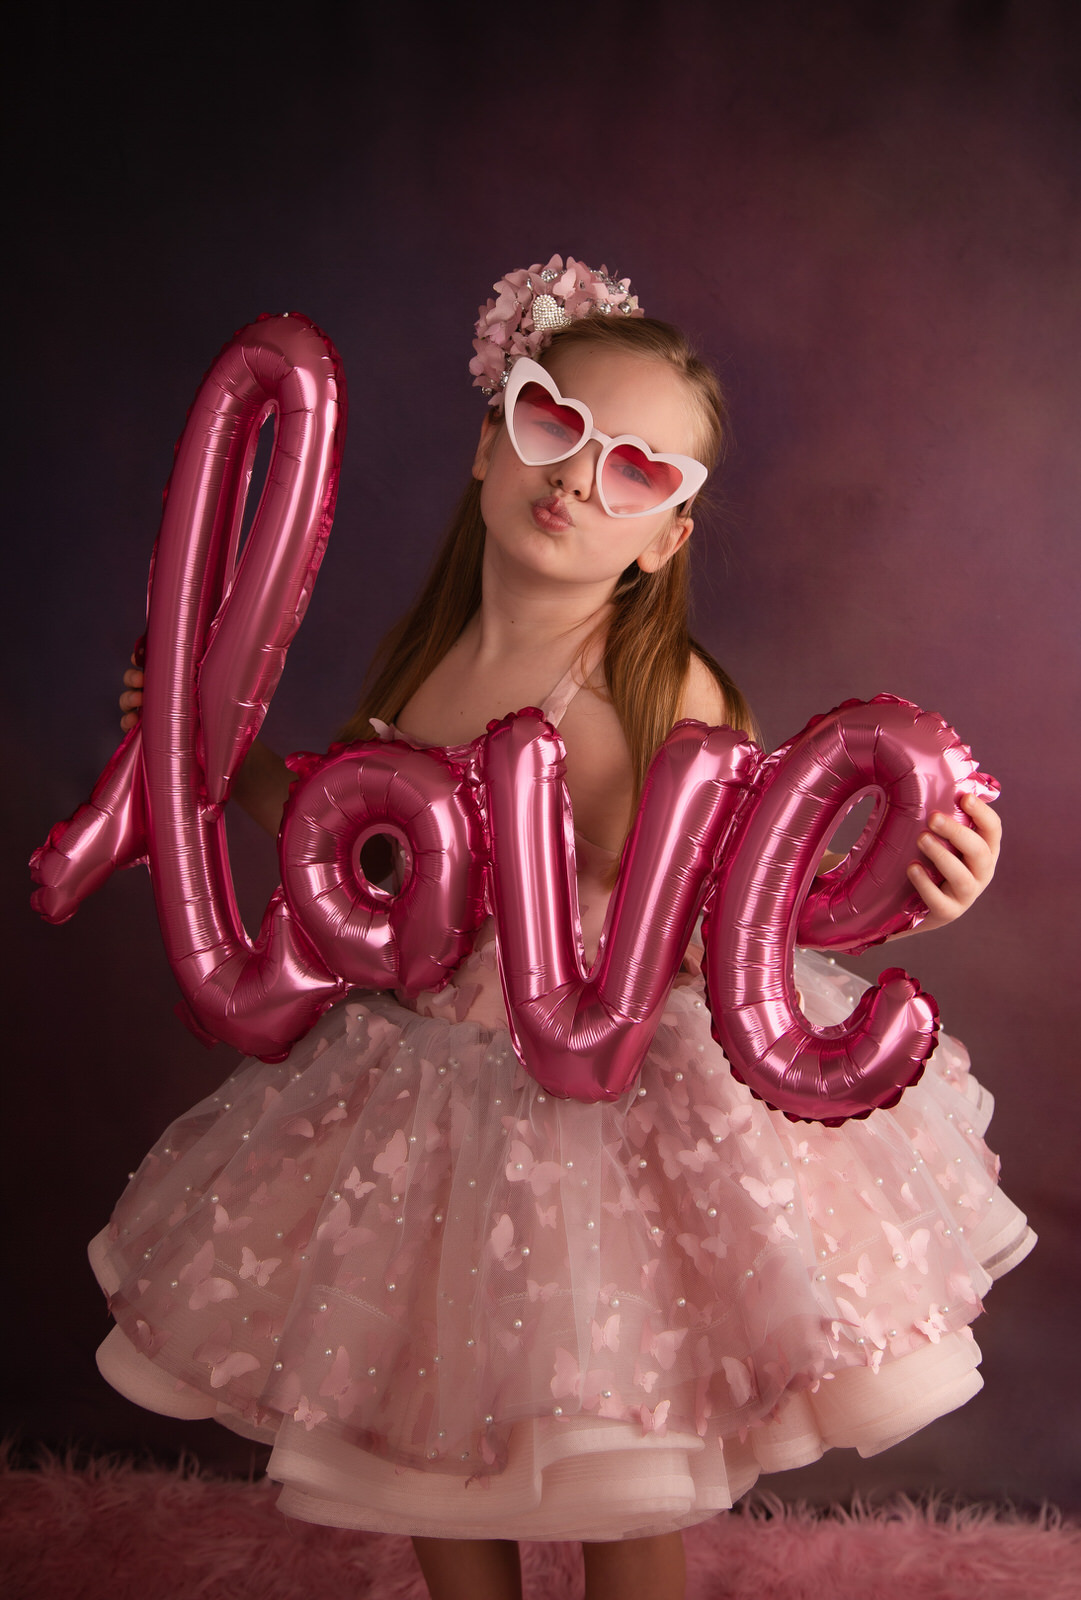 A young girl in a pink tulle tutu dress and heart-shaped sunglasses makes a kiss face with a love balloon fort worth toy stores